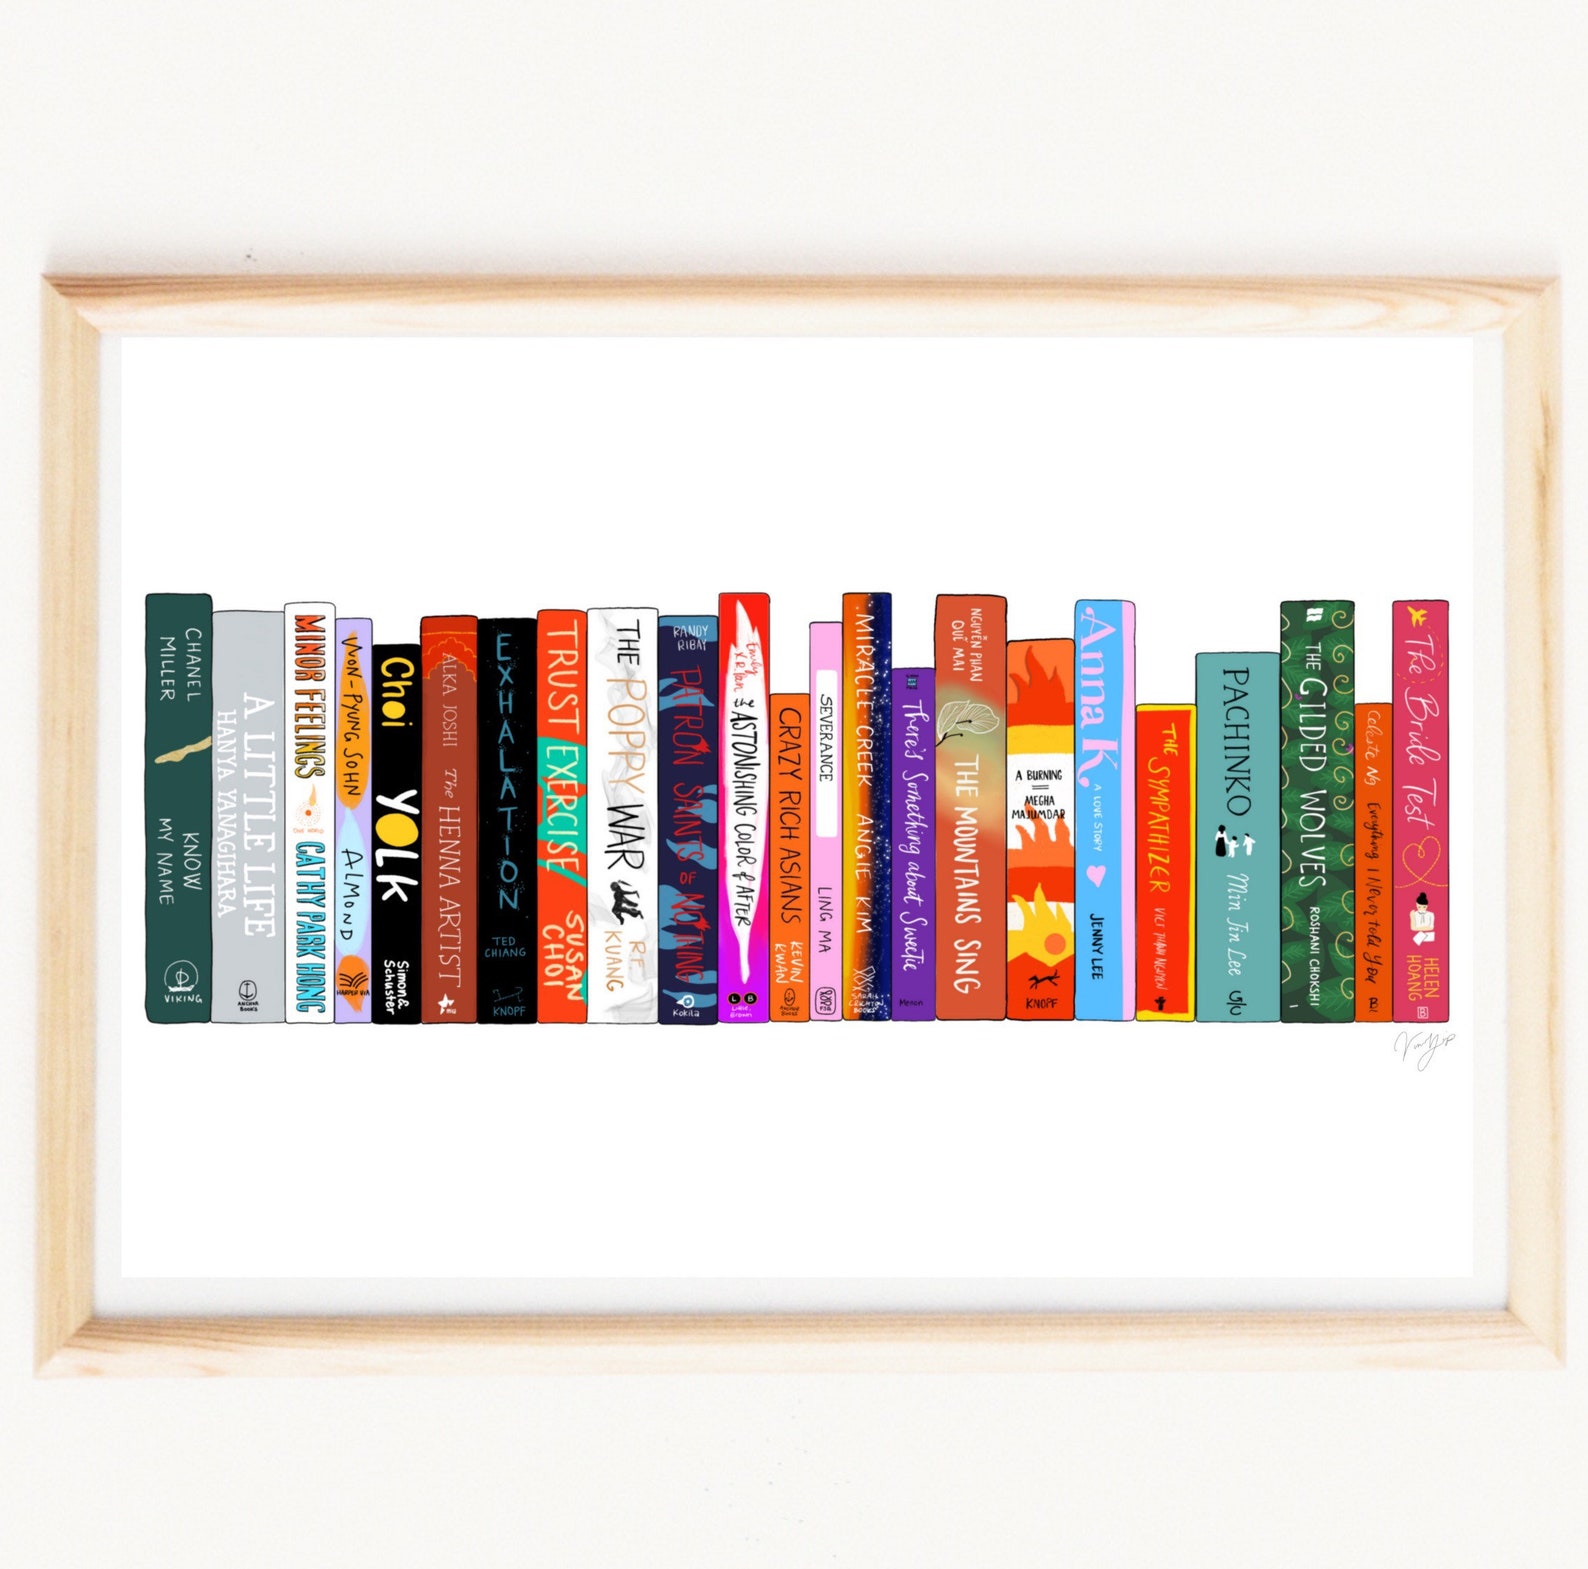 framed picture of books by Asian authors